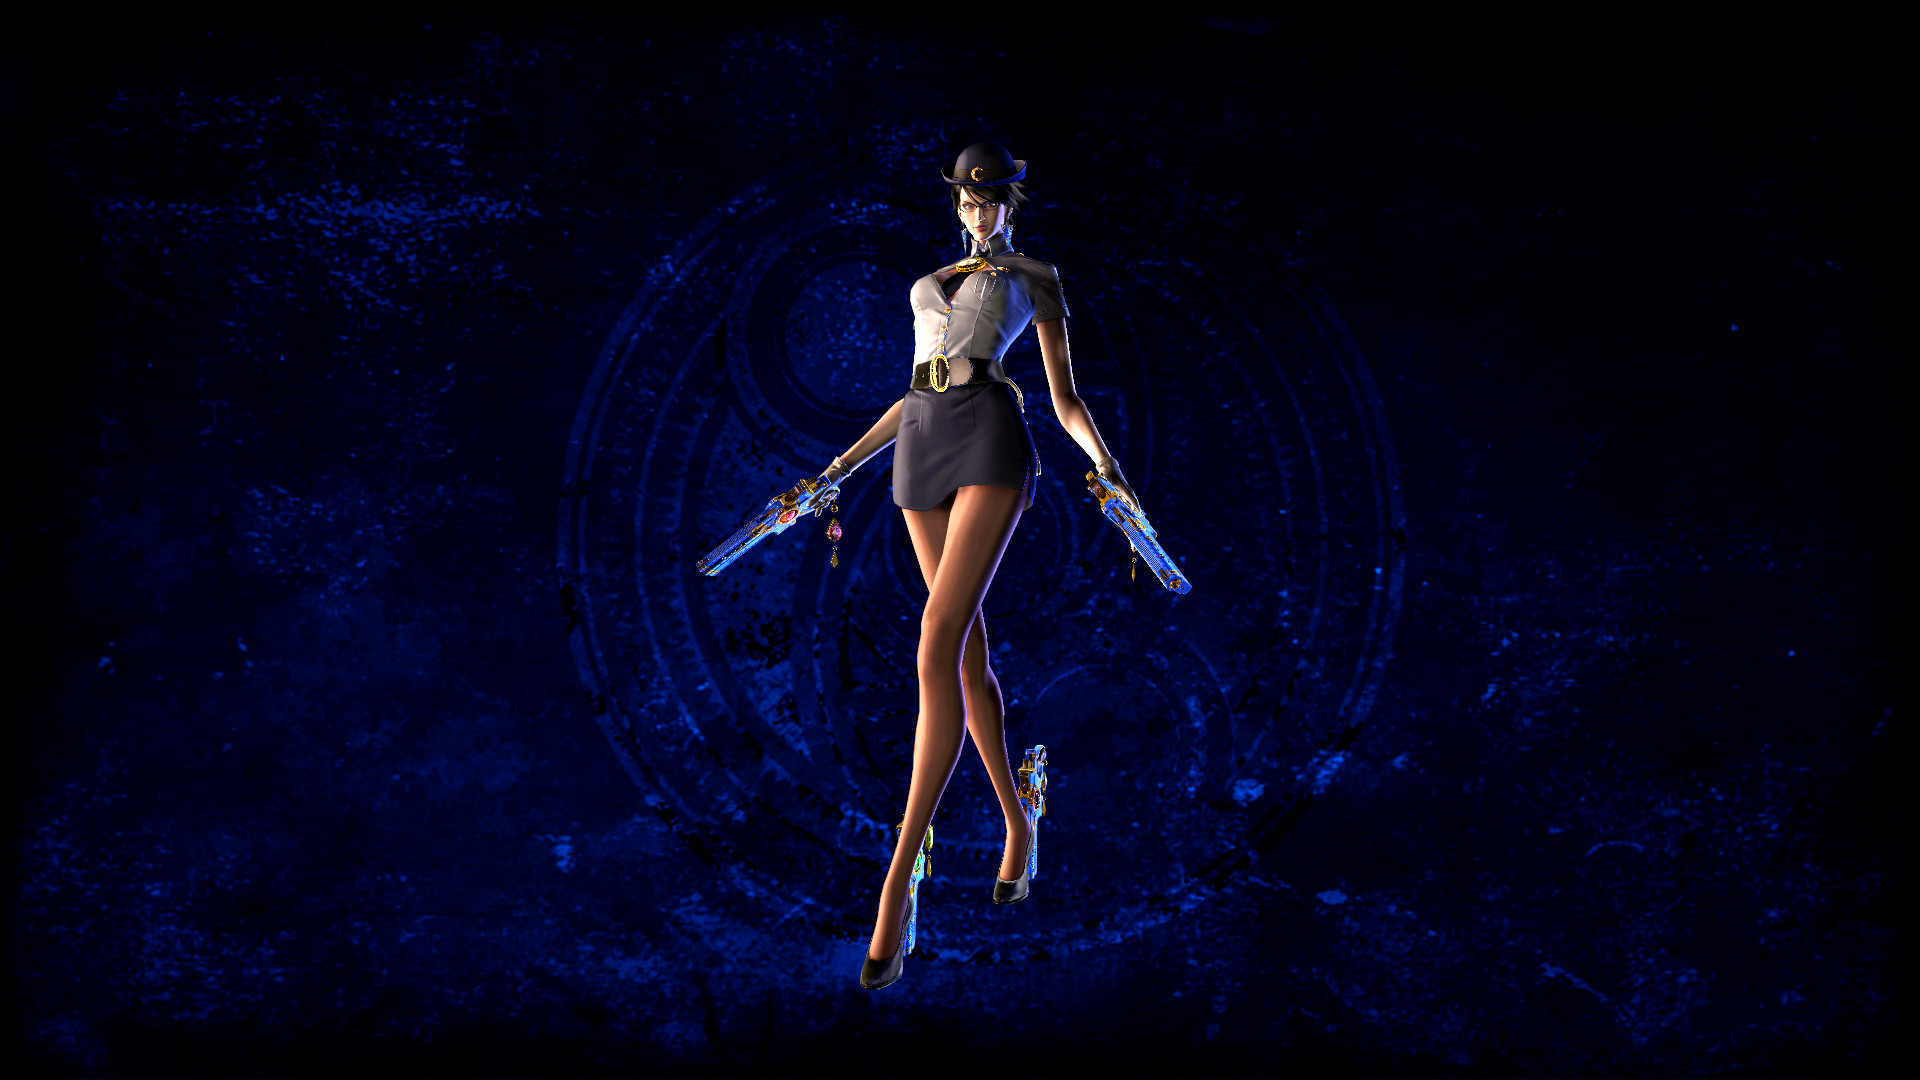 Weapon reskins and costume mods for Bayonetta feature - ModDB